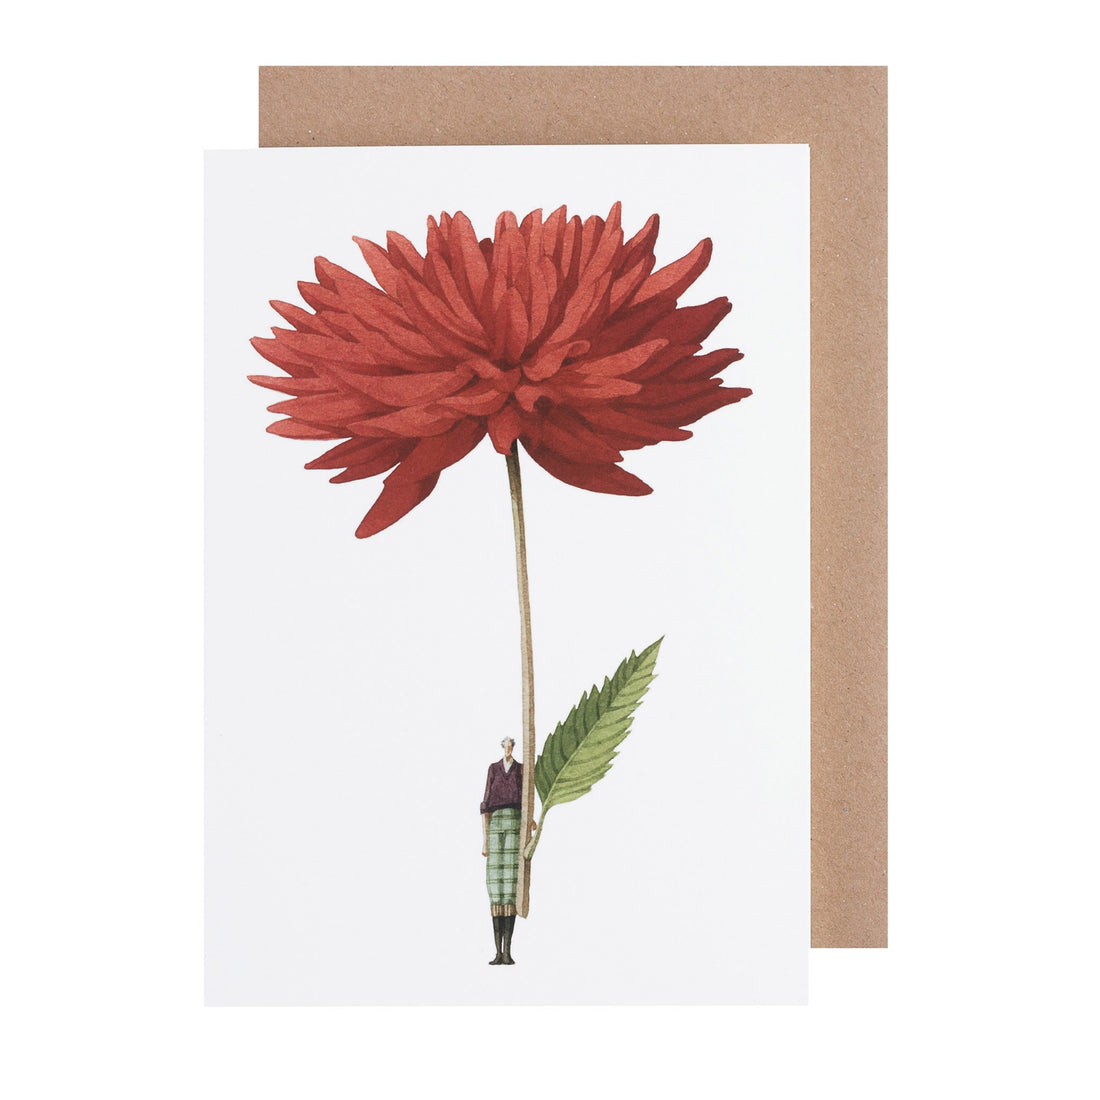 A person holding a large red flower that covers their upper body is depicted on a Hester &amp; Cook Dahlia Greeting Card, made of environmentally sustainable paper, with a brown envelope in the background.